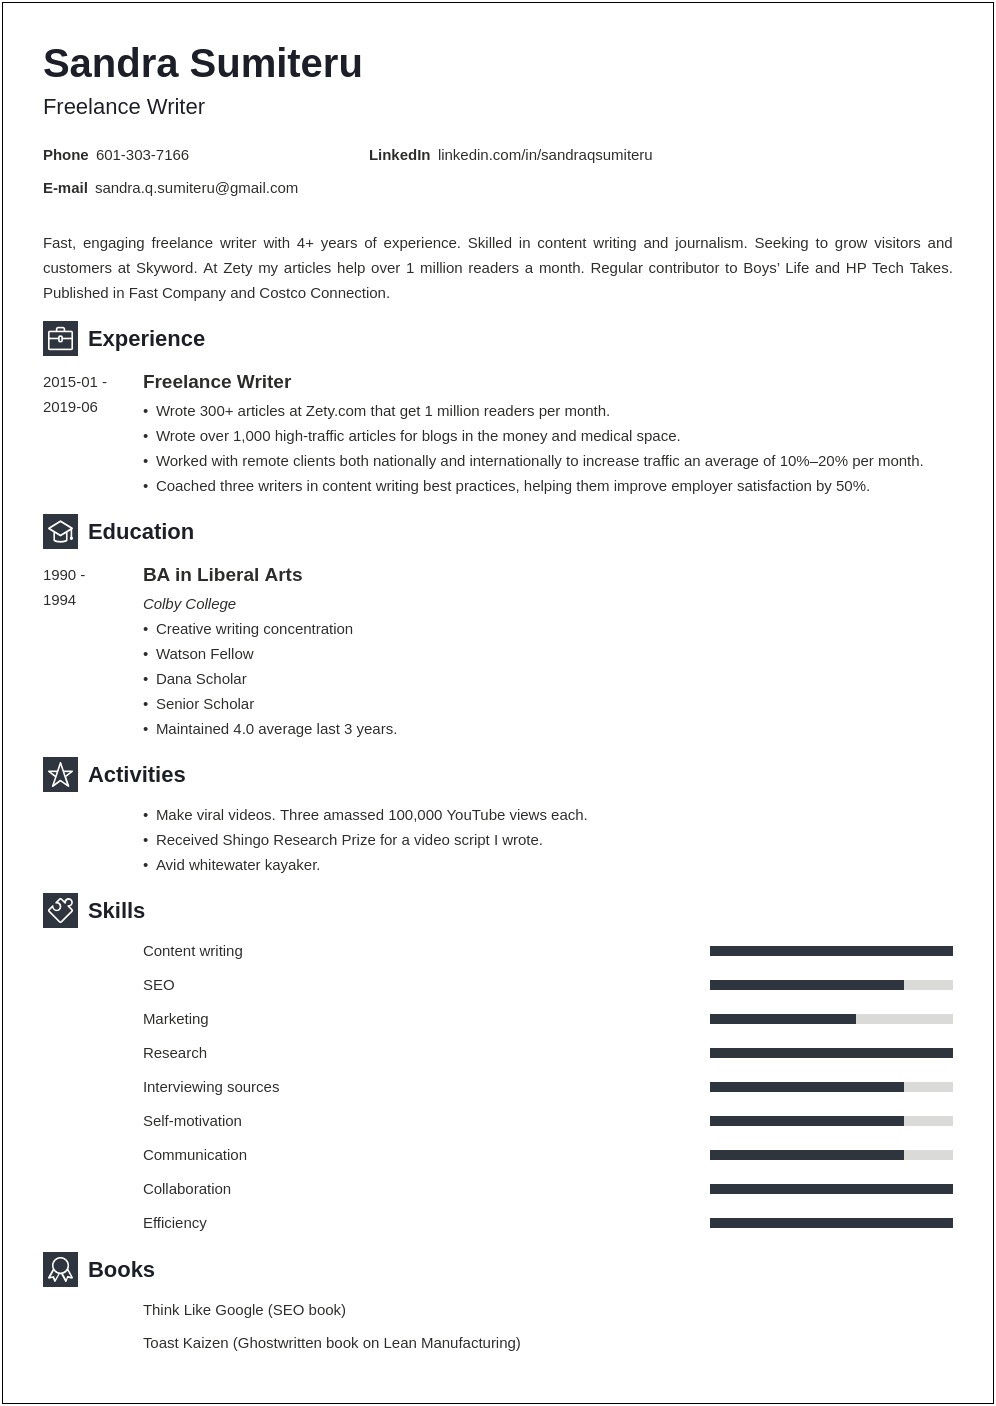 Sample Resume For A Content Writer